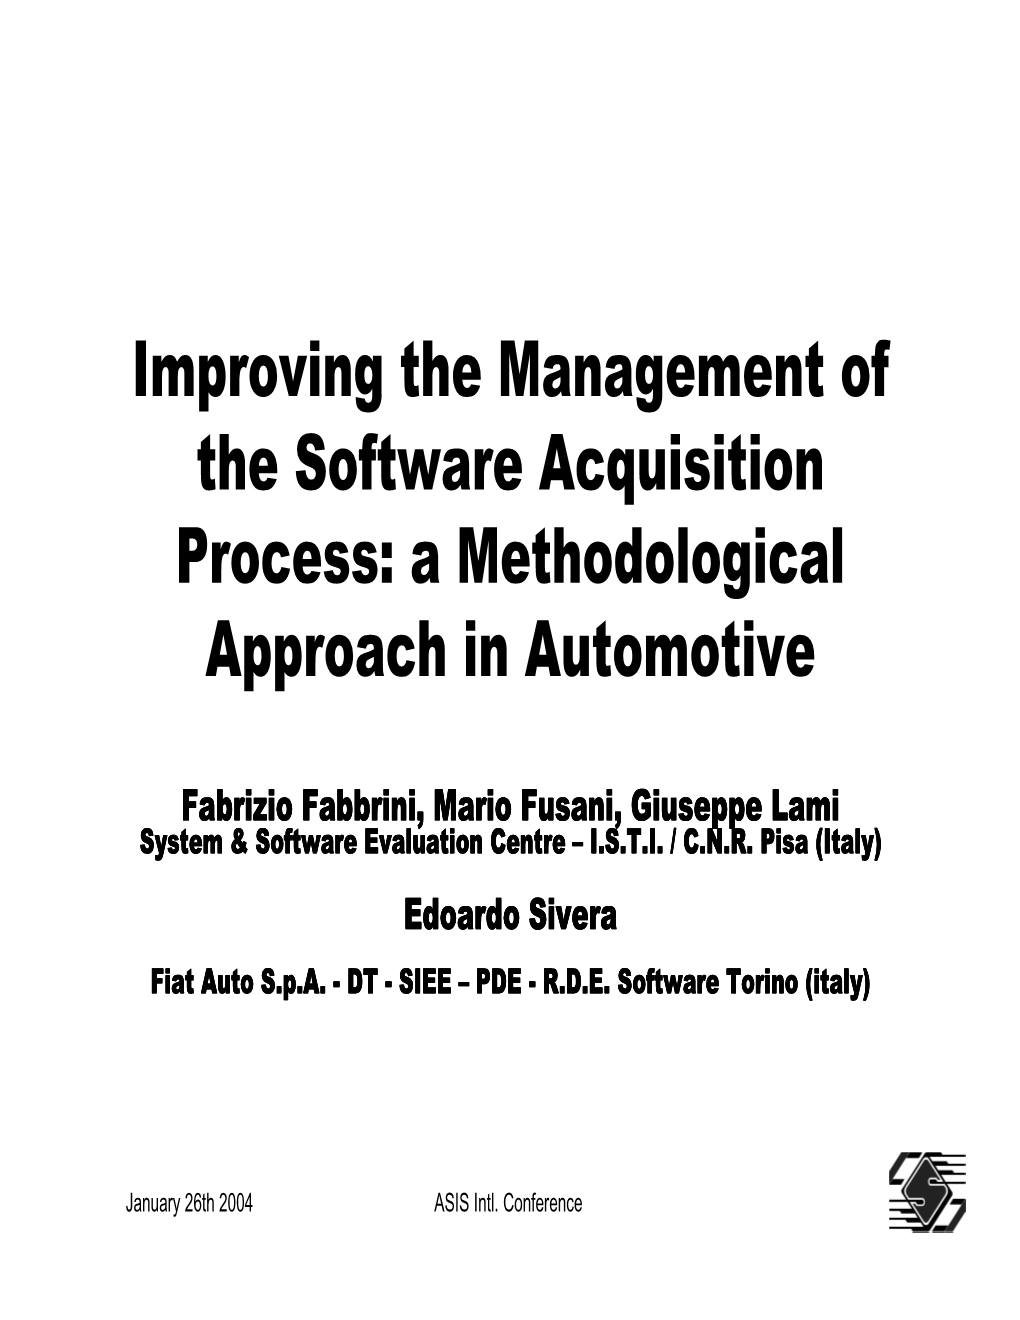 A Methodological Approach in Automotive